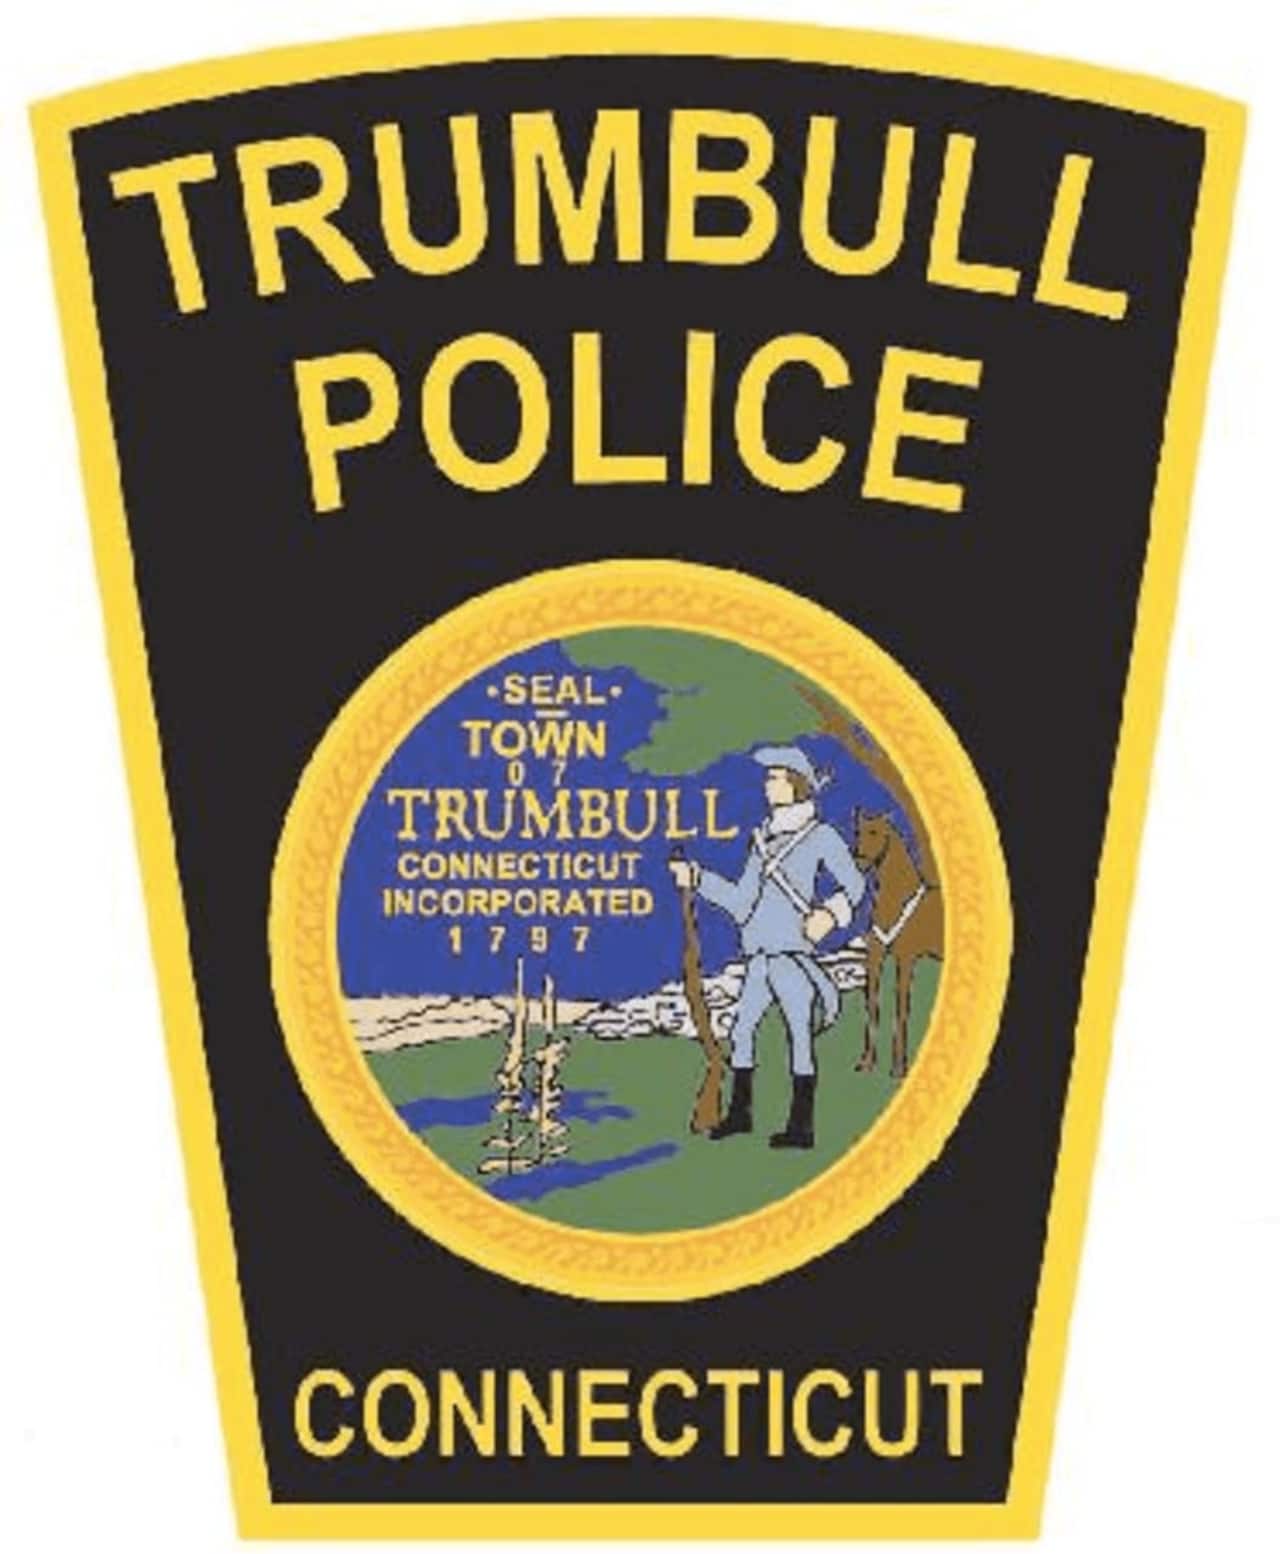 Trumbull Police are warning residents of a rash of car break-ins and thefts.